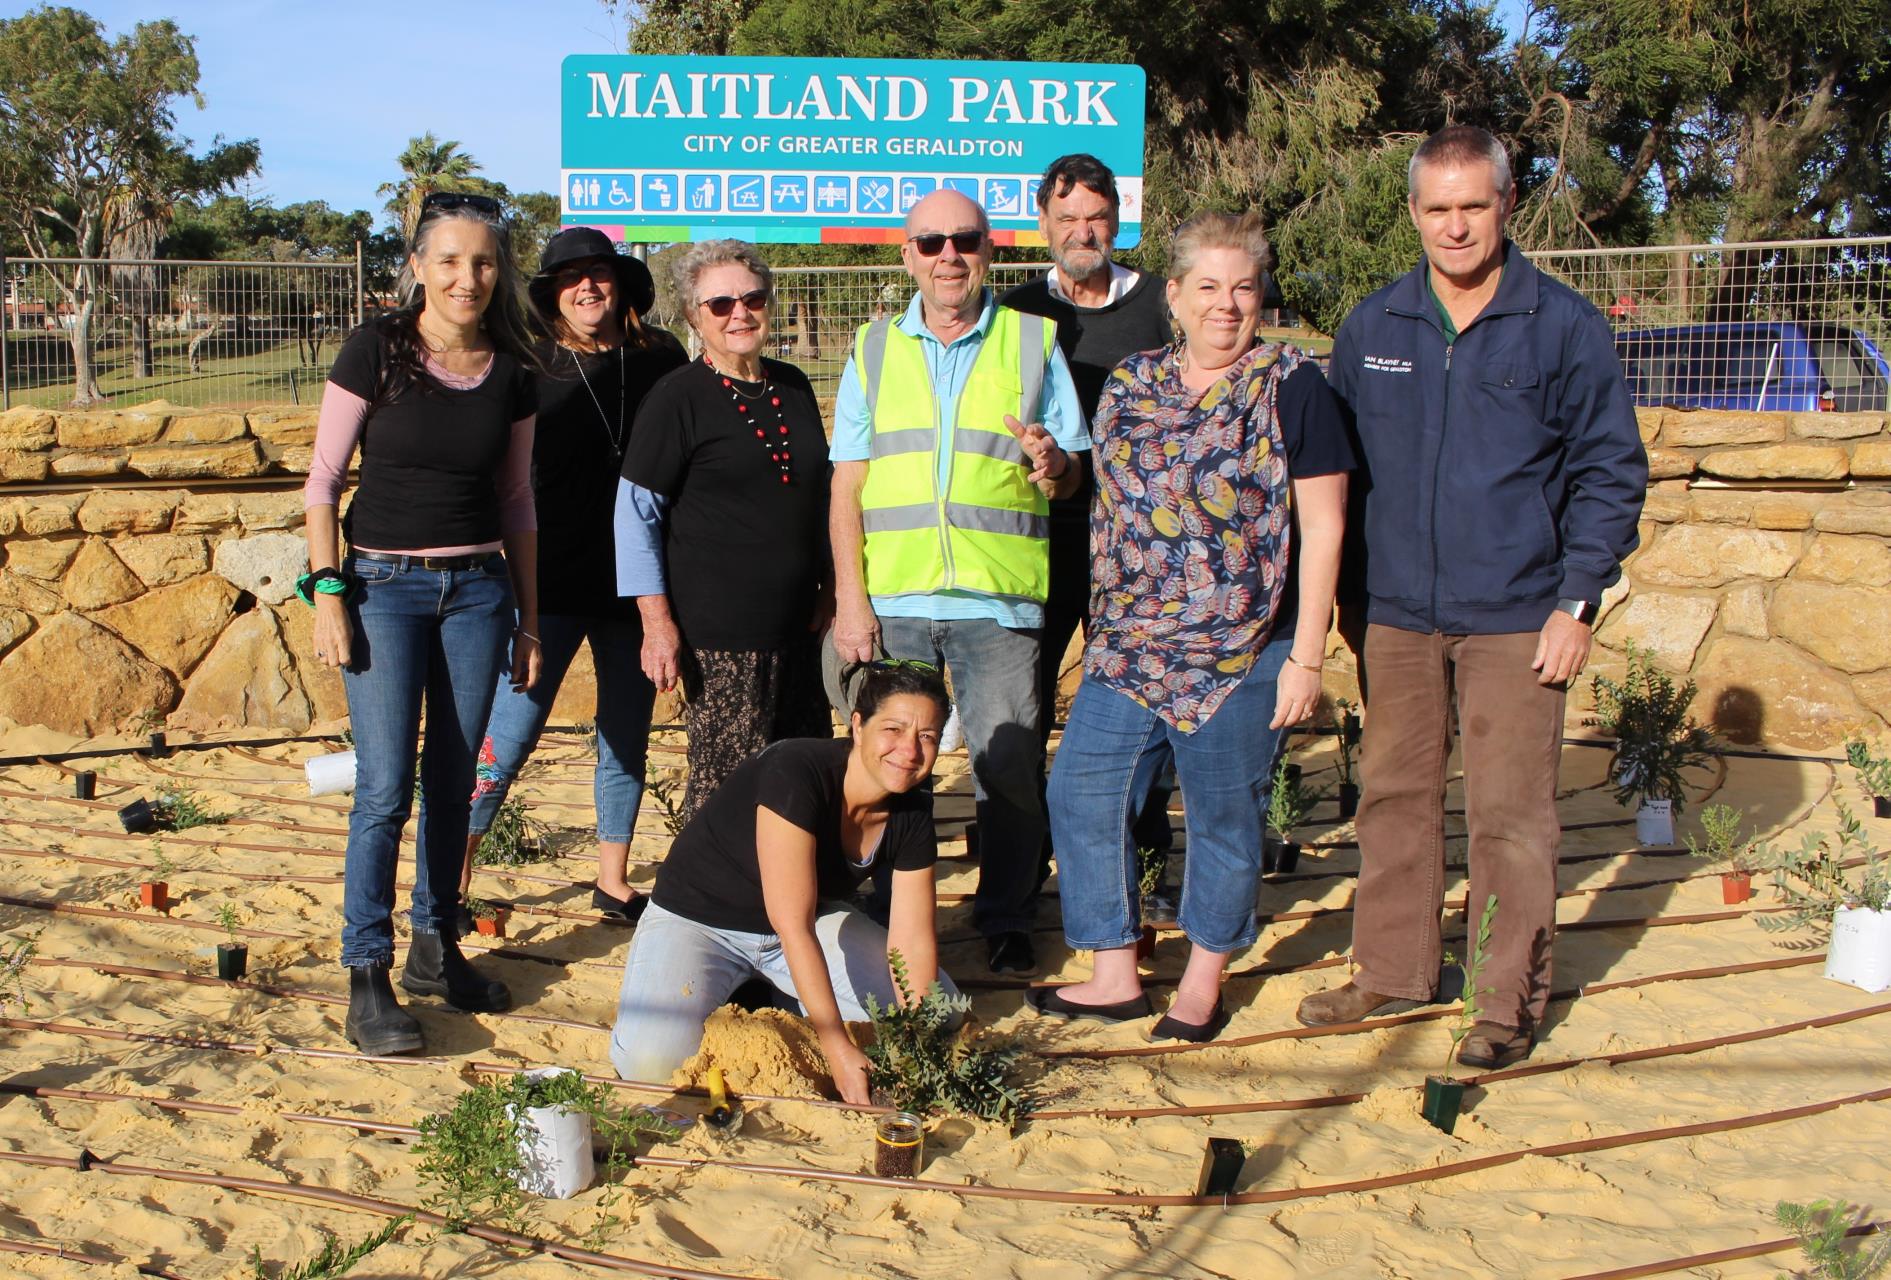 Group photo of first seedling being planted at Maitland Park